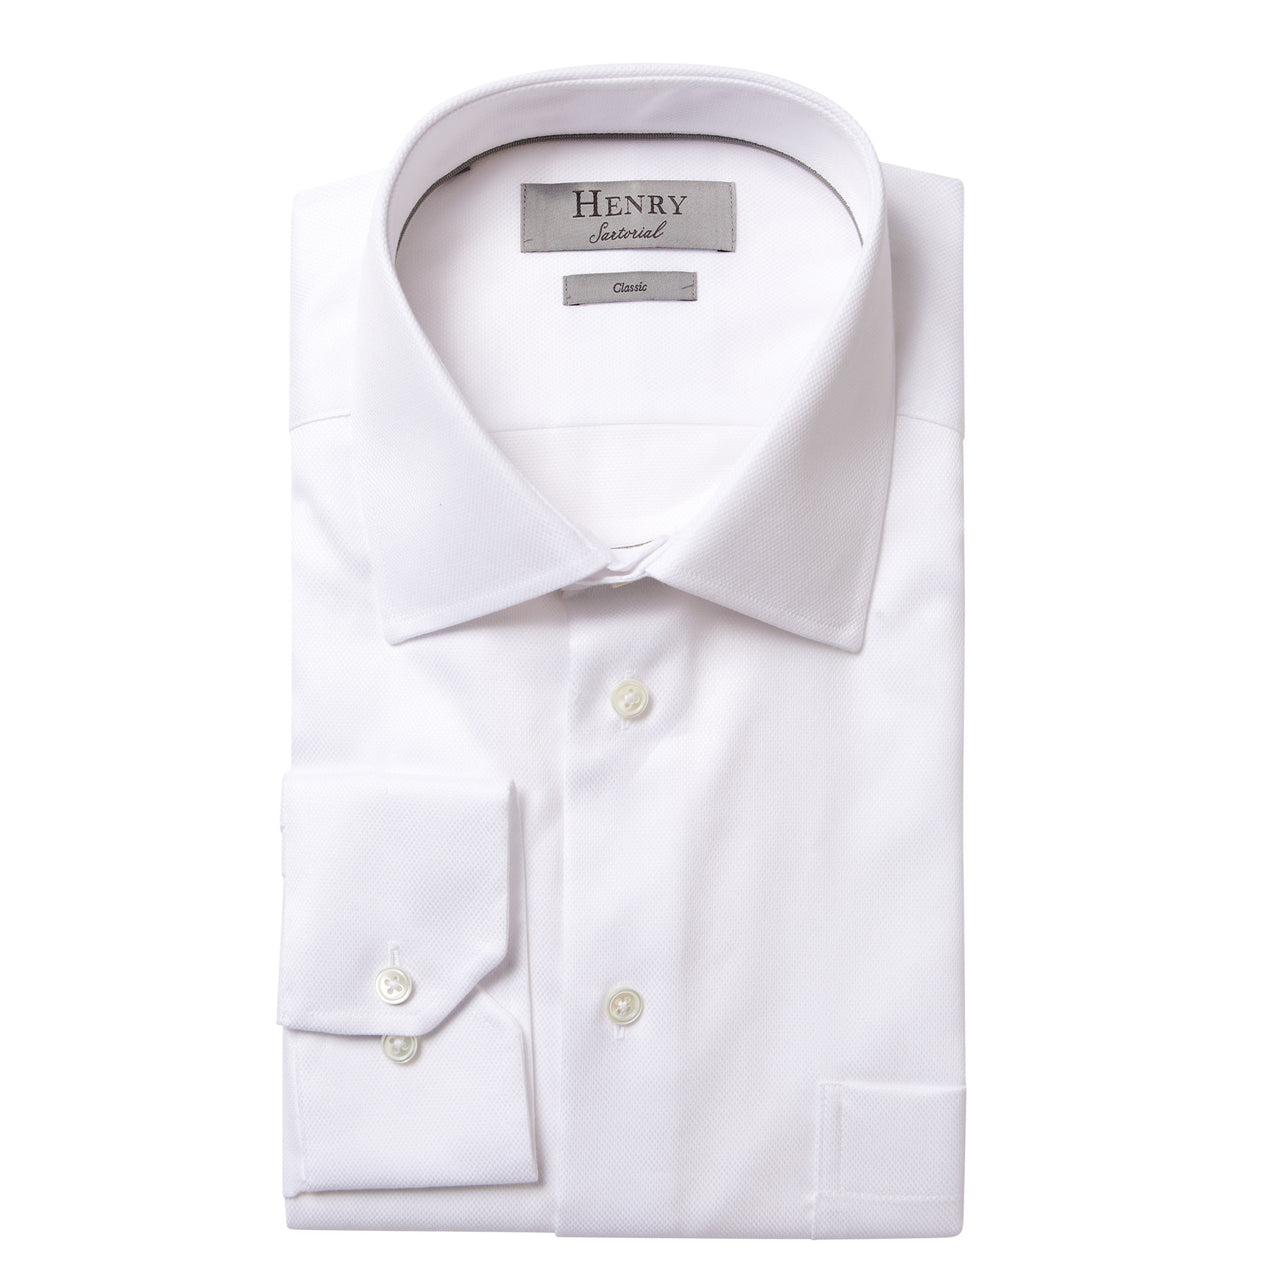 HENRY SARTORIAL Plain Oxford Business Shirt Single Cuff Classic Fit WHITE